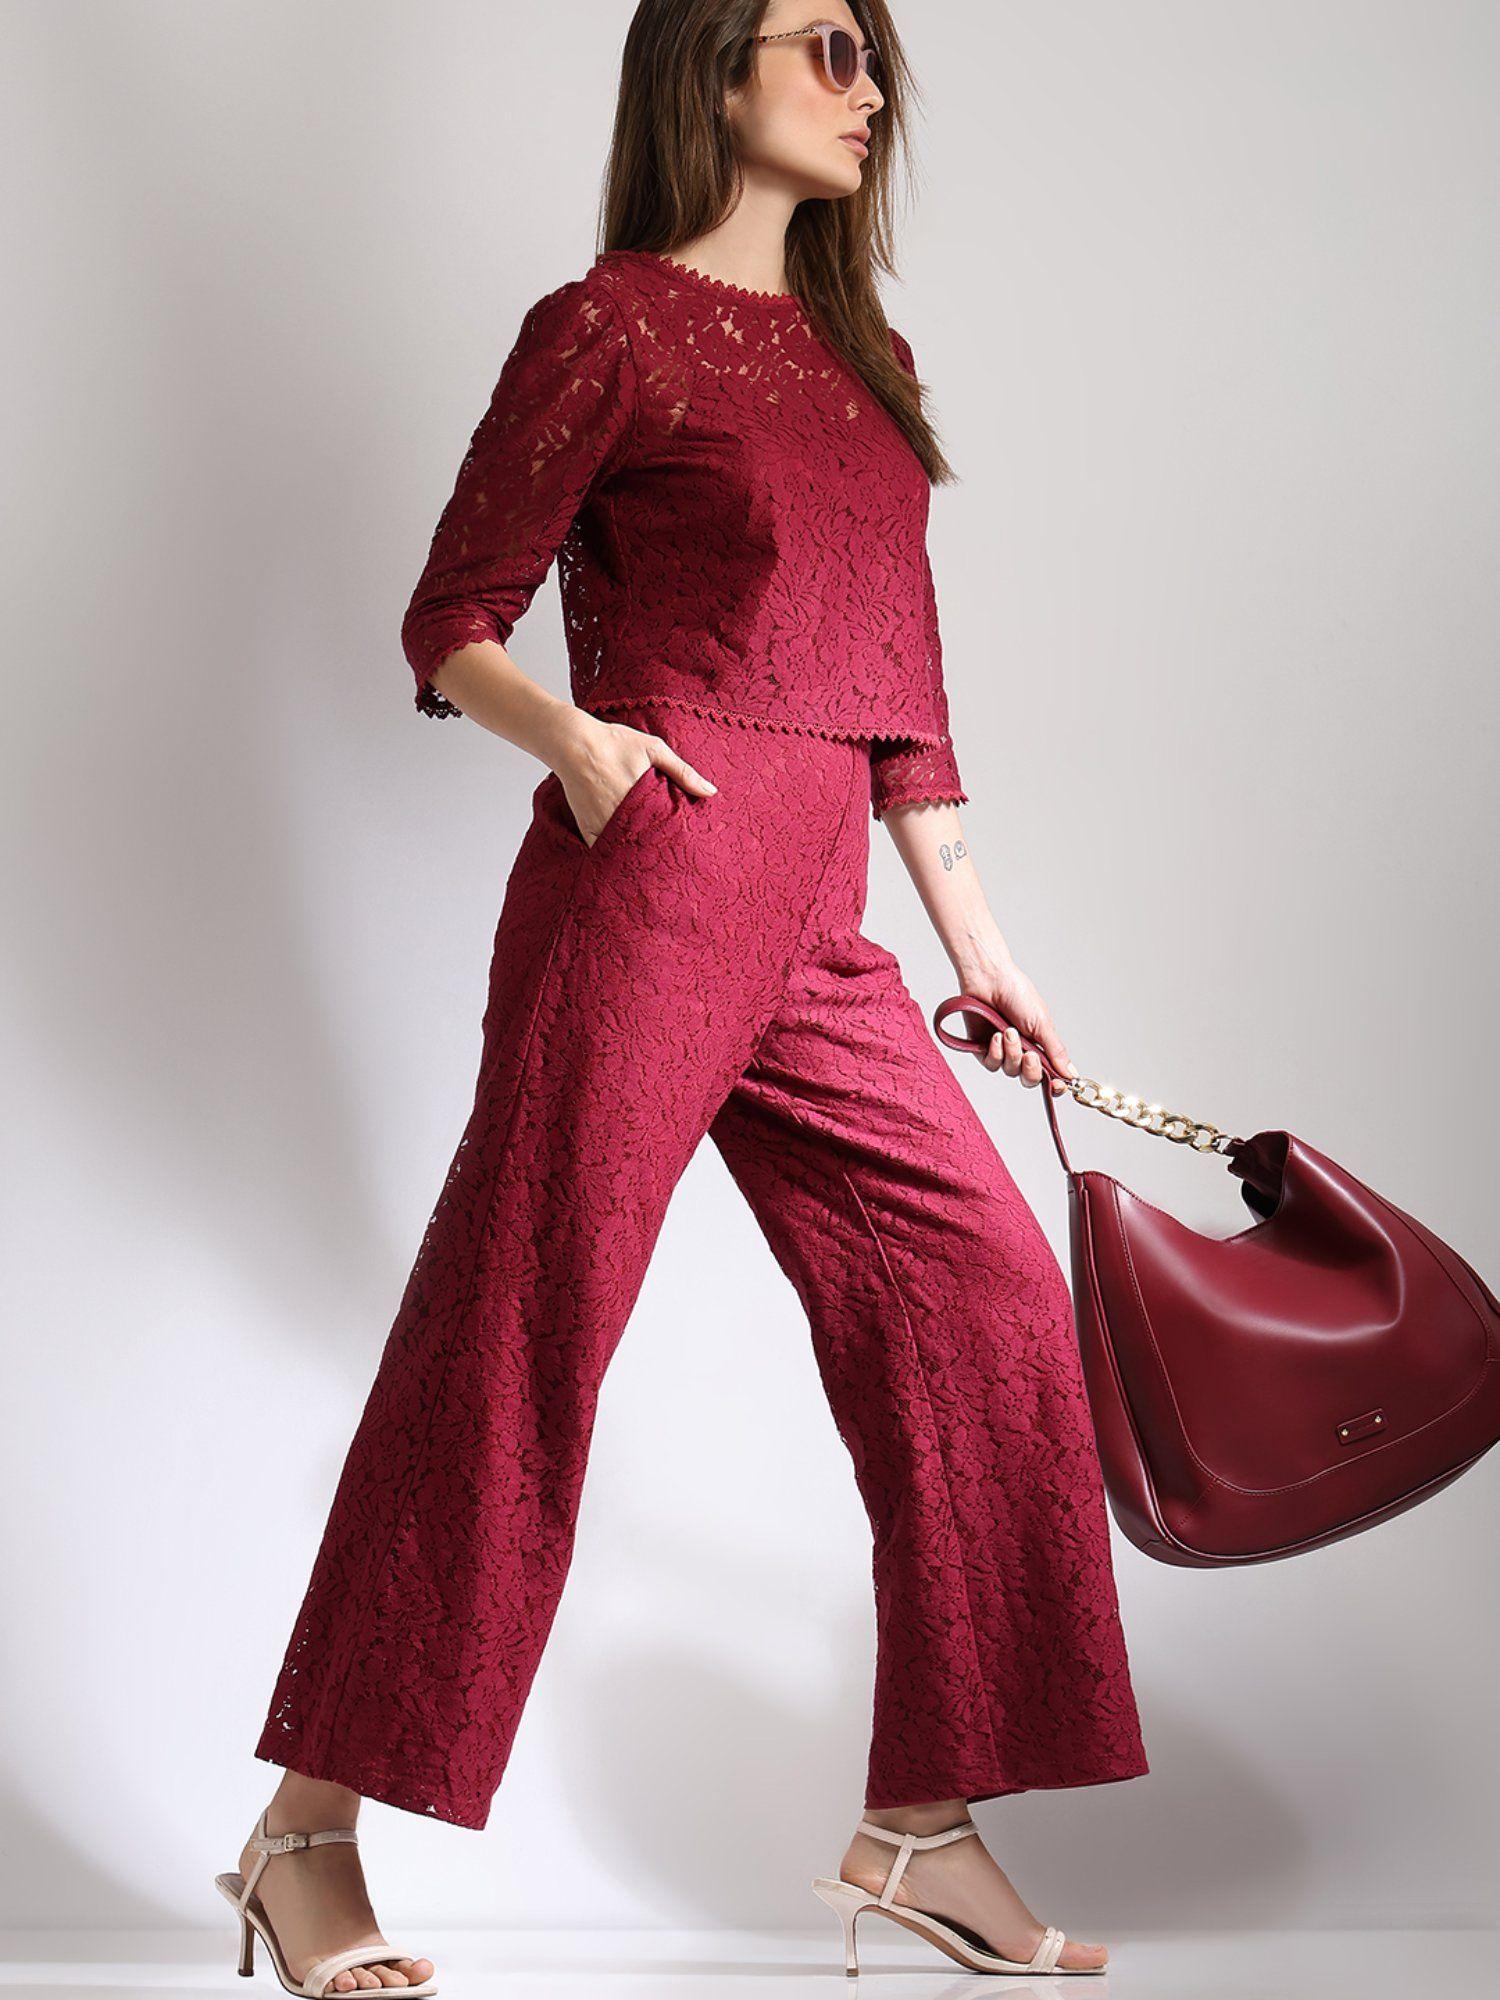 maroon high rise lace pant